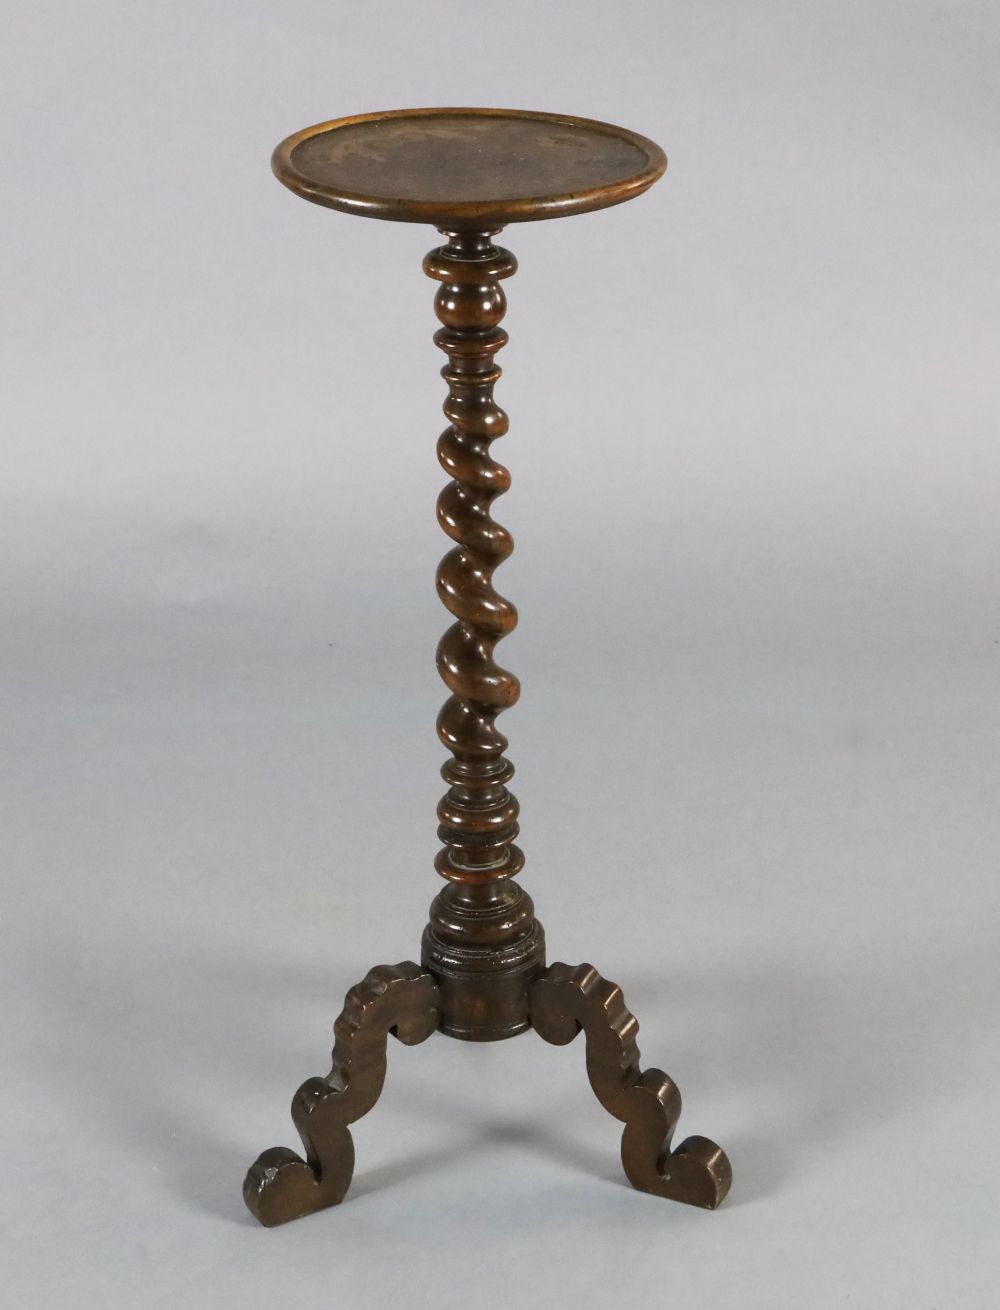 A late 17th century Dutch walnut candle stand, W.11in. H.2ft 8in. (later modification)